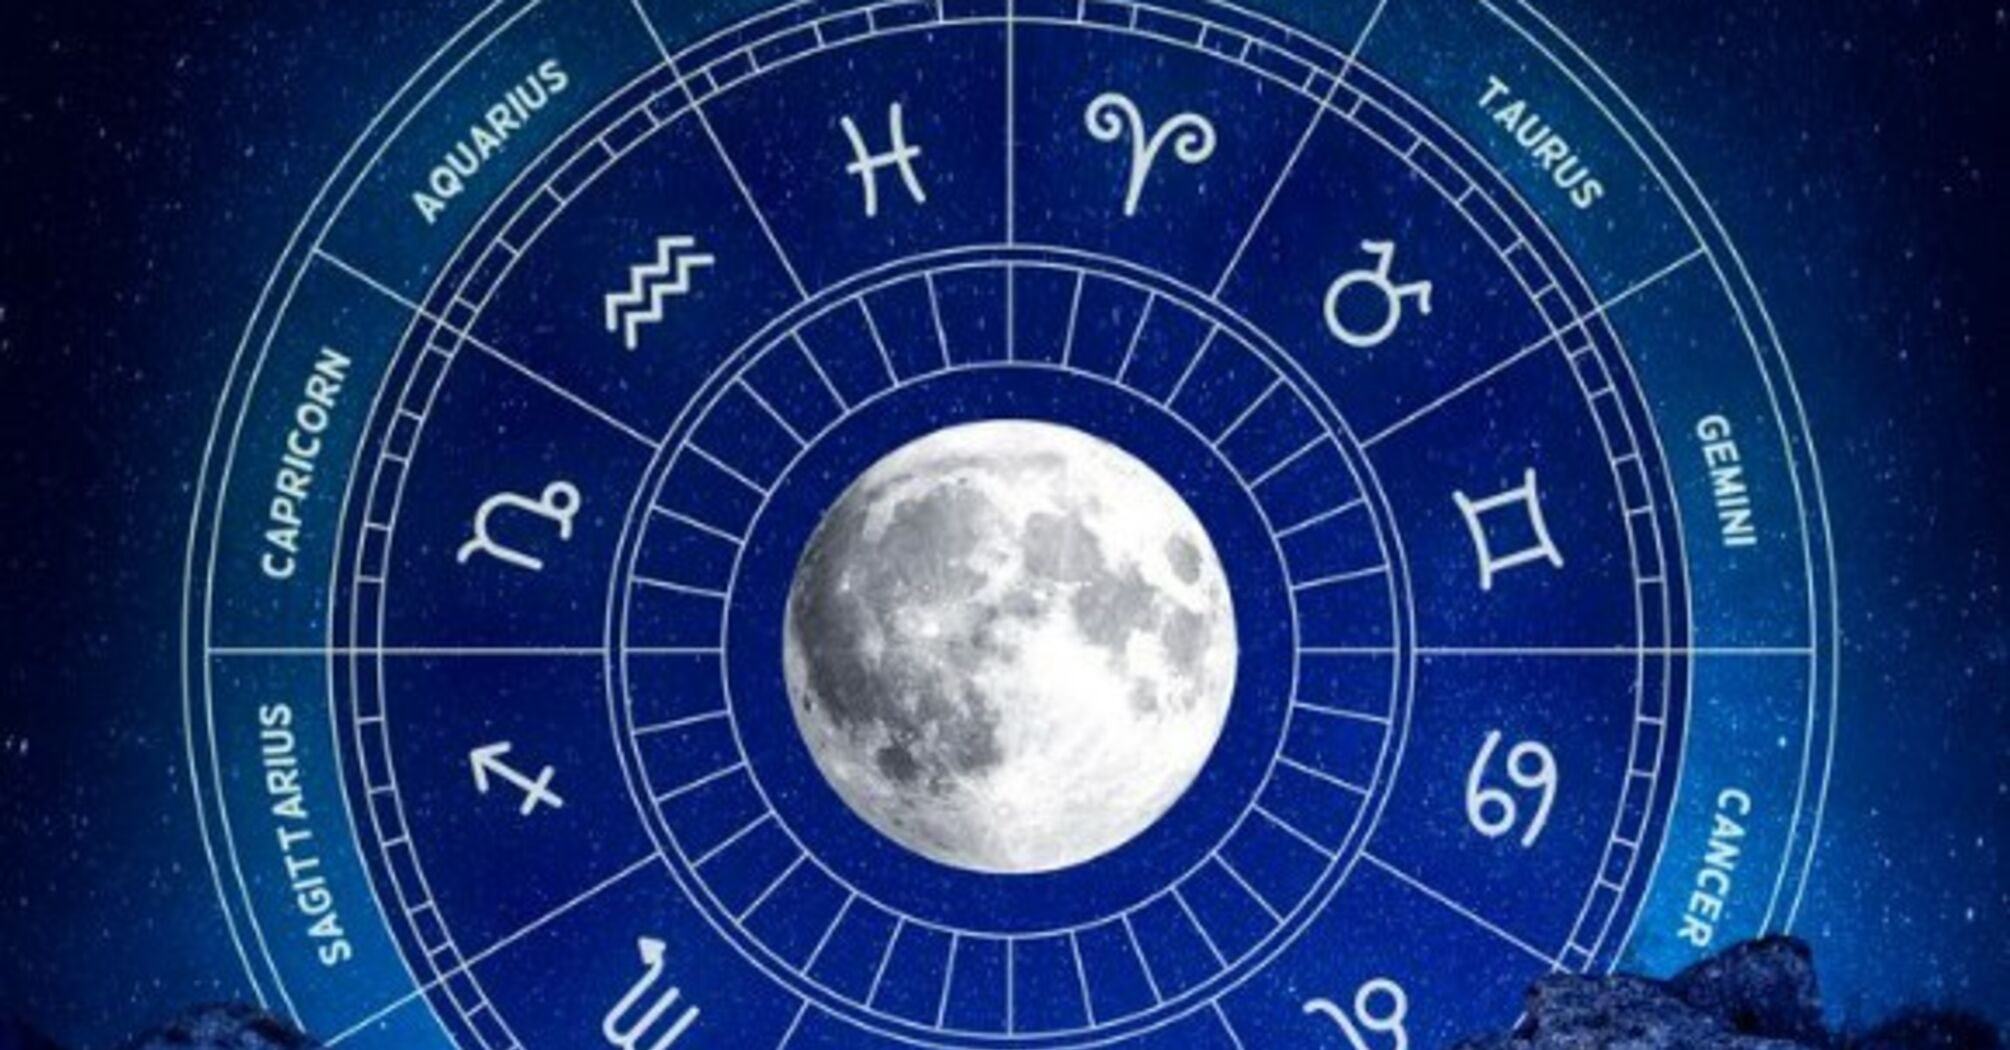 Five zodiac signs will boost self-confidence this week